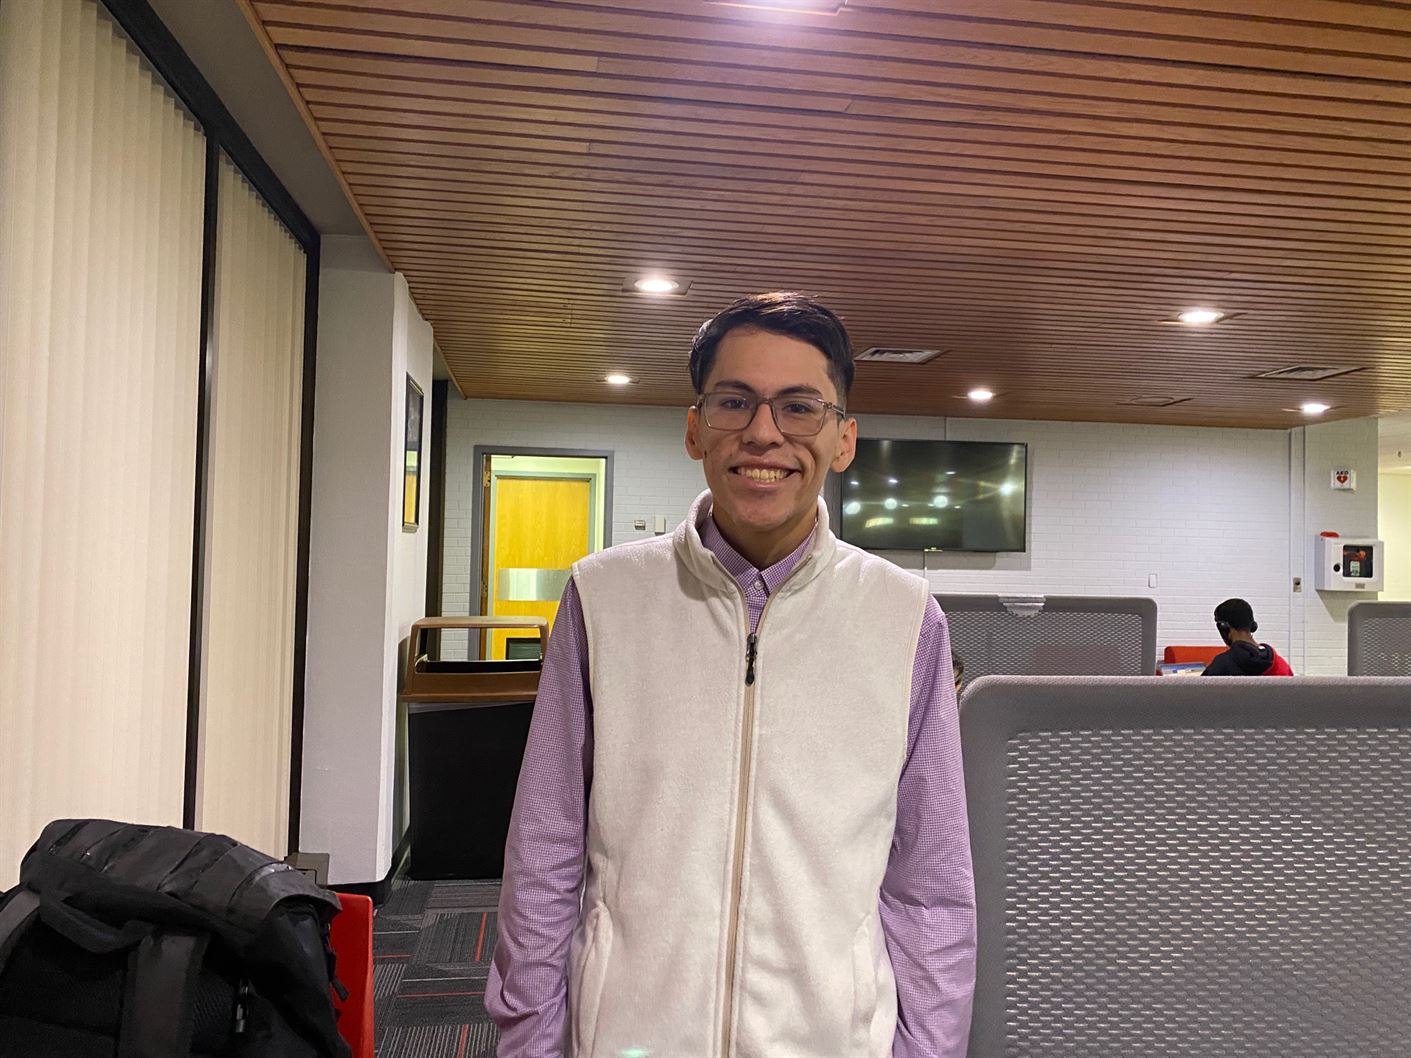 Jose Morales, a junior business administration major, is one of the candidates running for SGA treasurer and change some of the areas he wants to improve if elected. 
Kamil Santana | The Montclarion